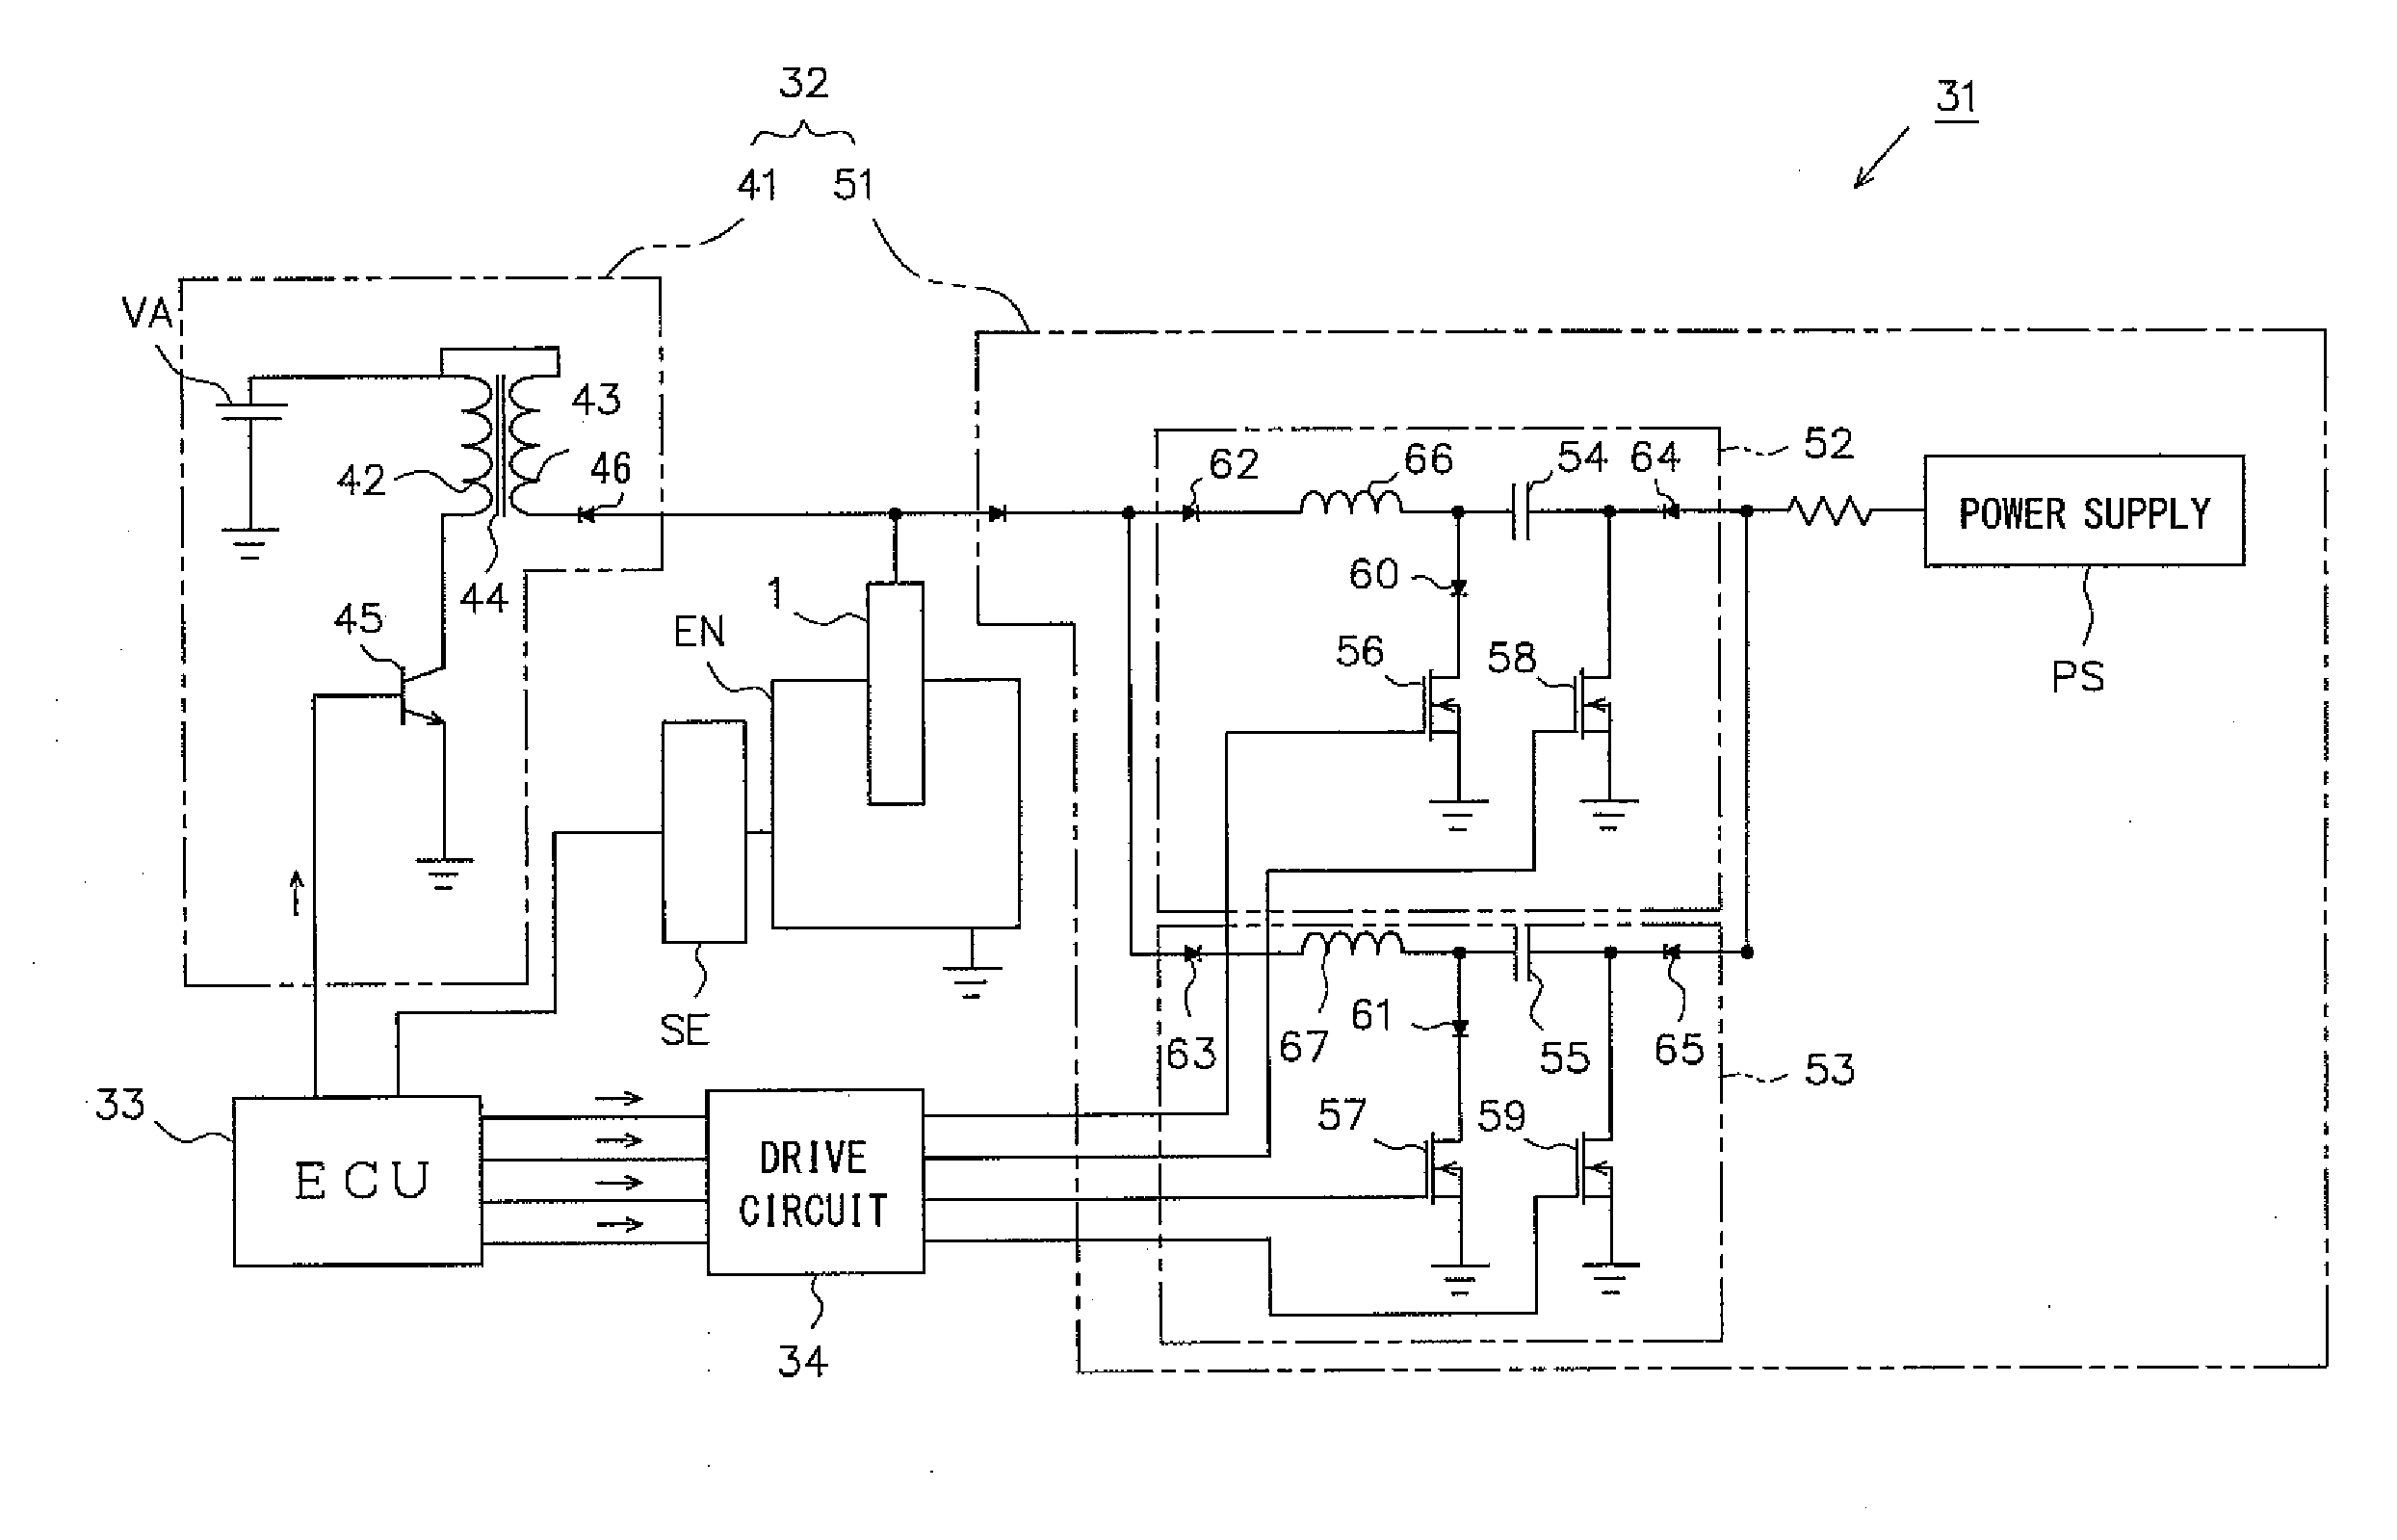 Ignition apparatus for plasma jet ignition plug and ignition system